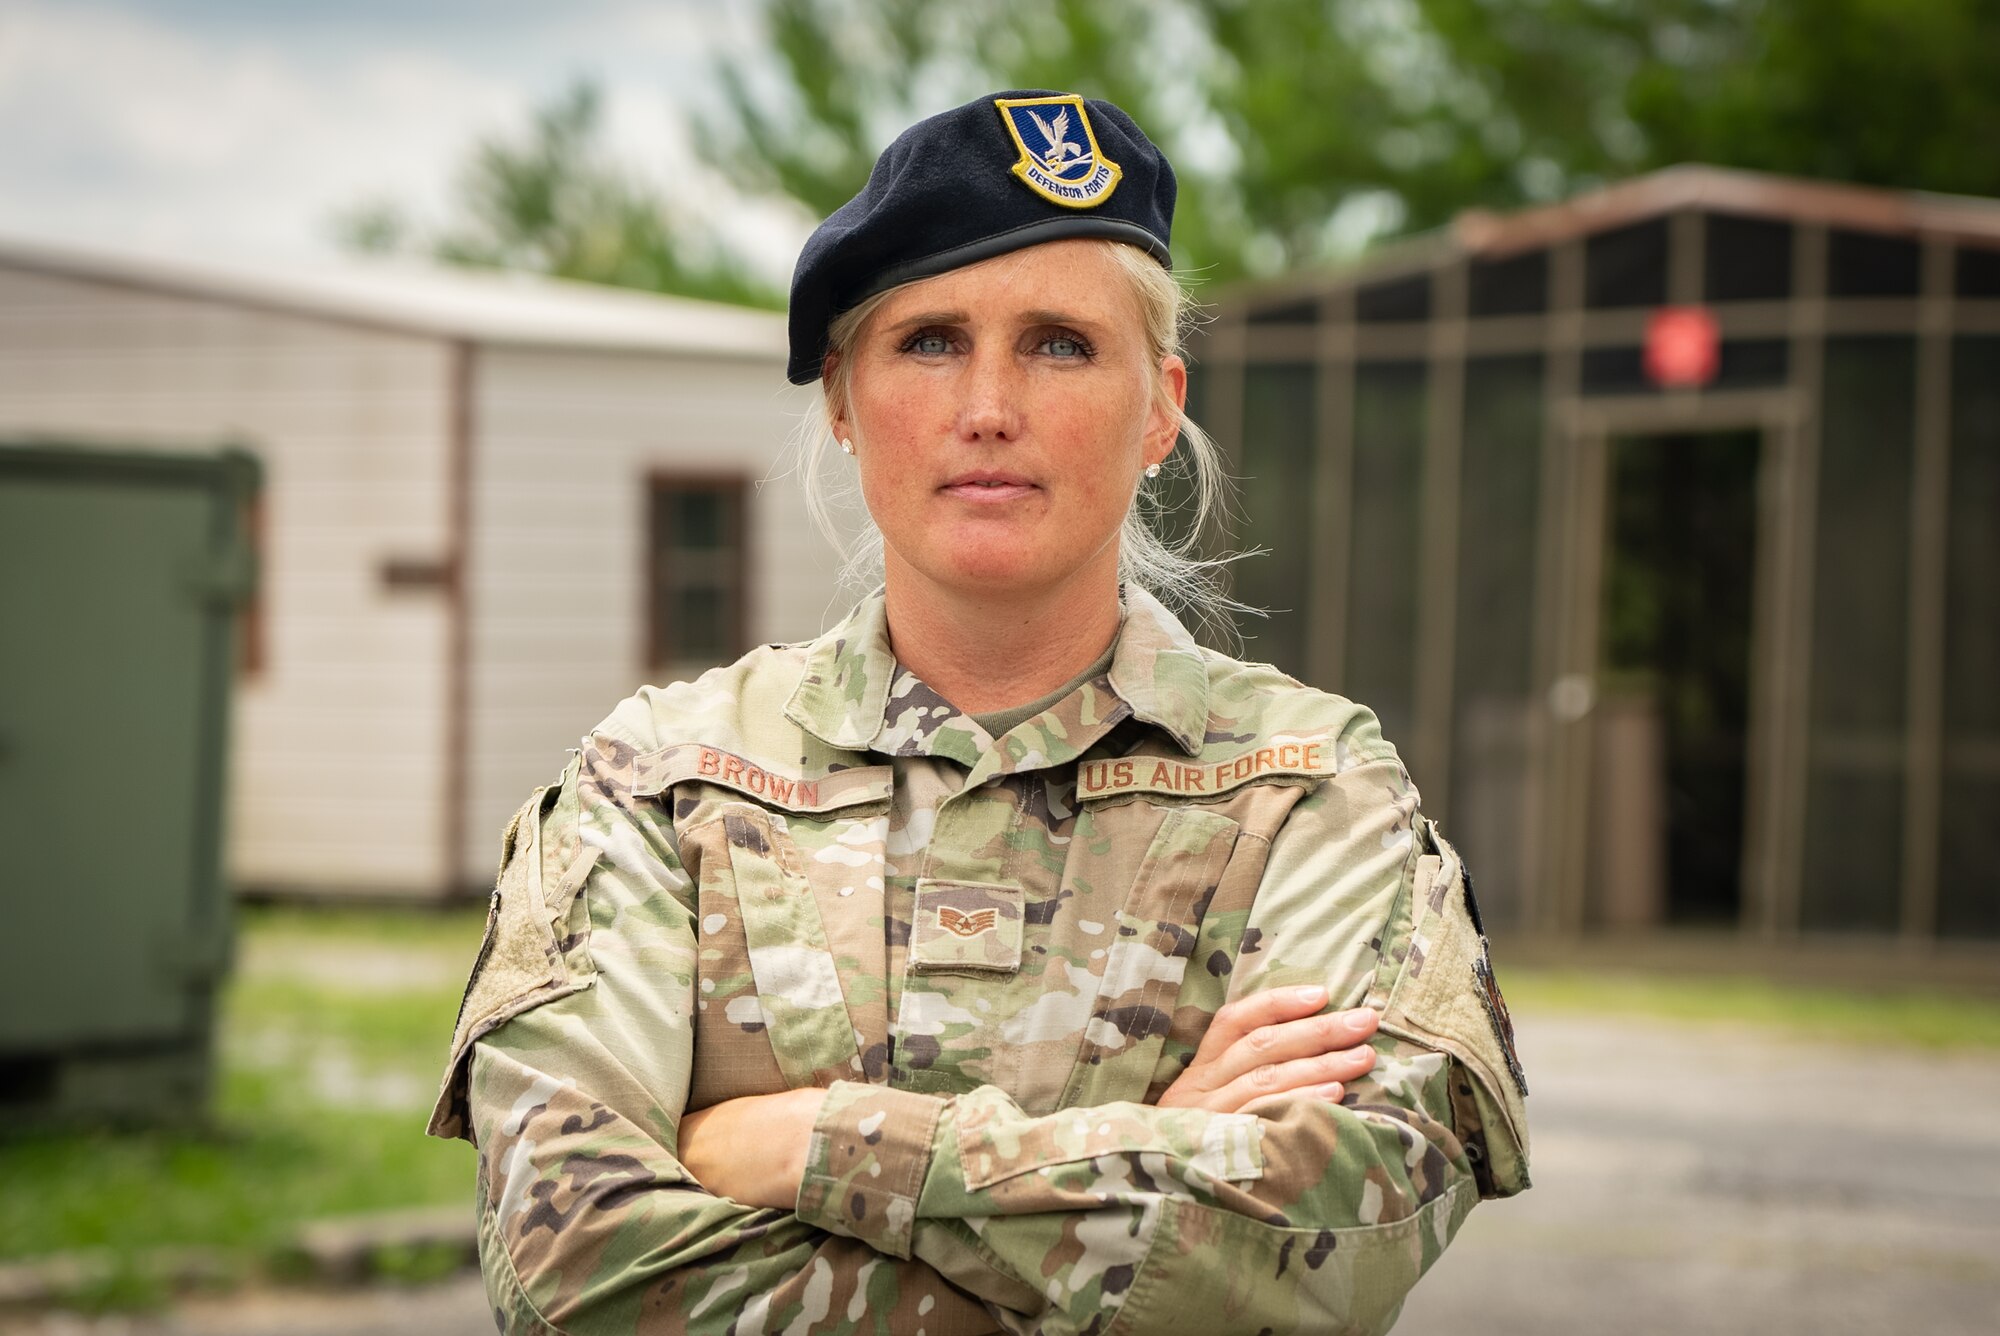 Female Airman wearing a beret poses with arms crossed.